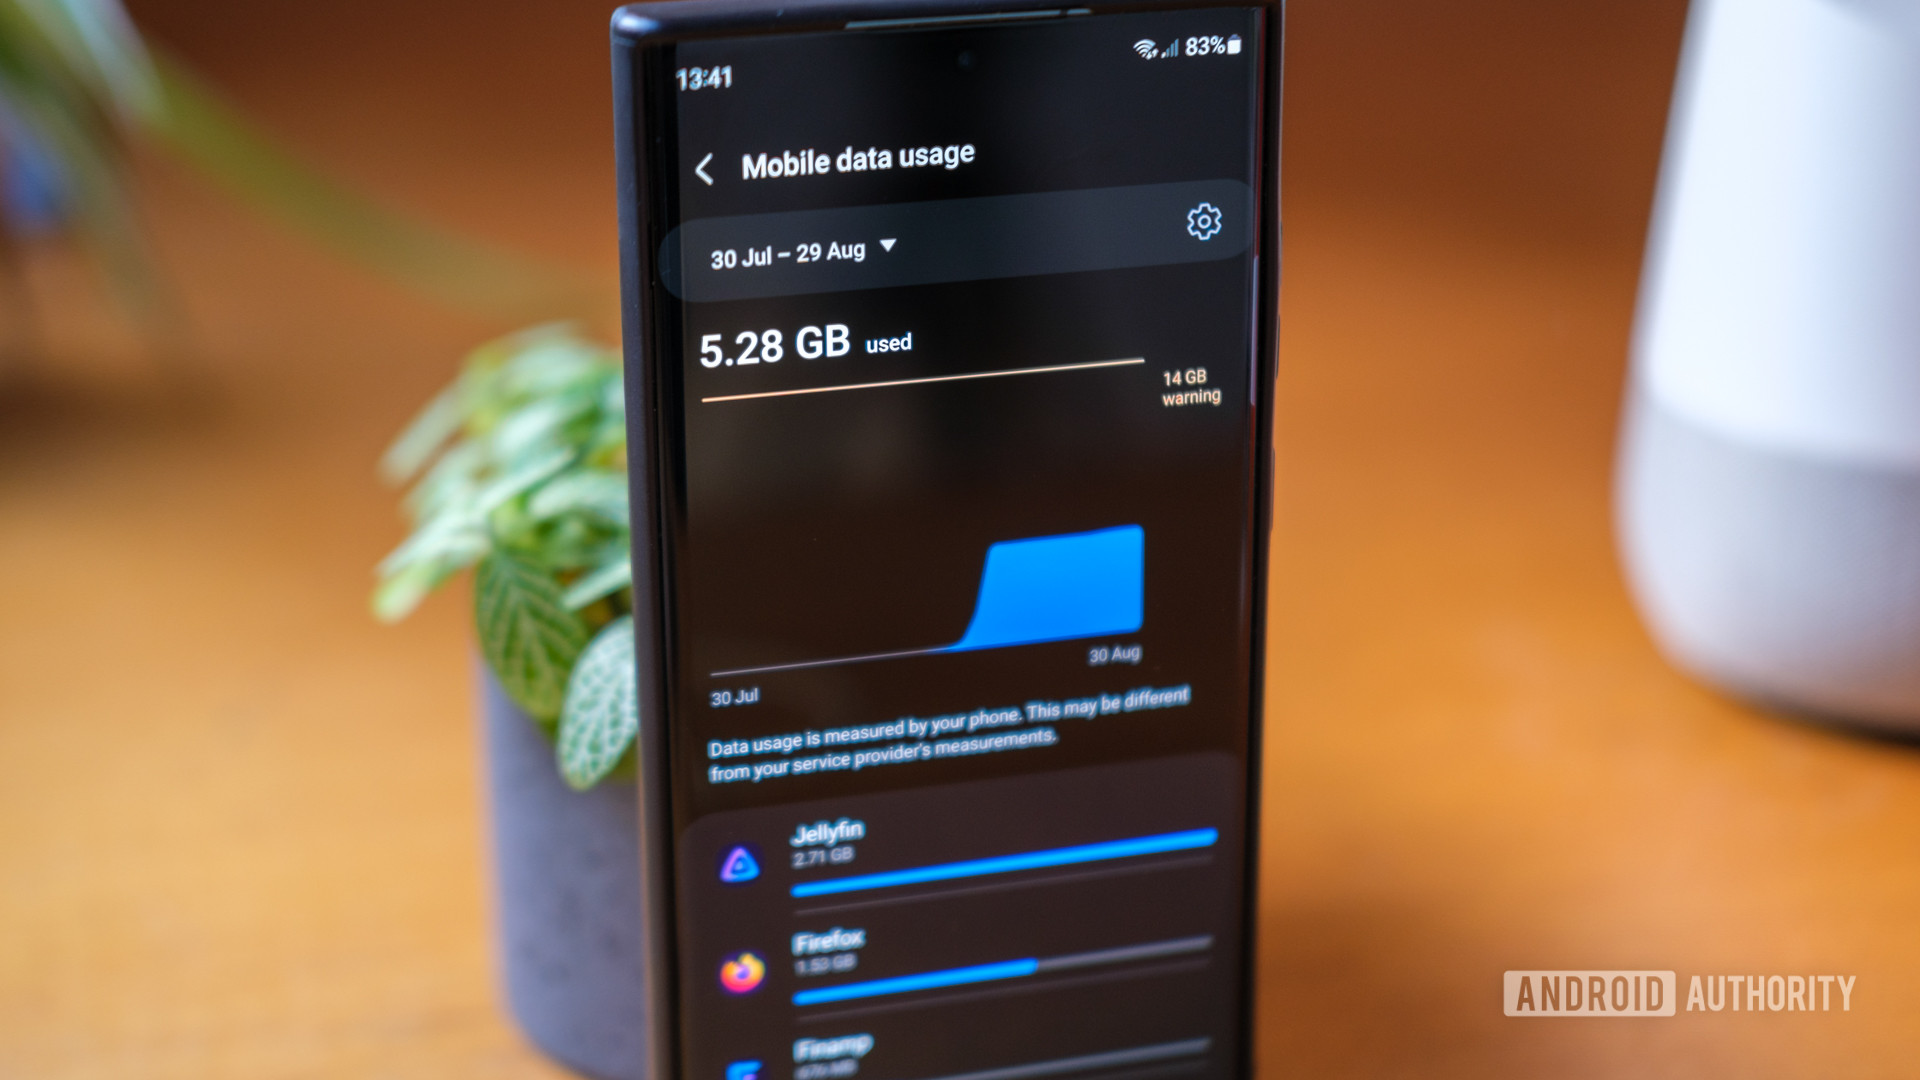 Mobile data usage settings from top to bottom